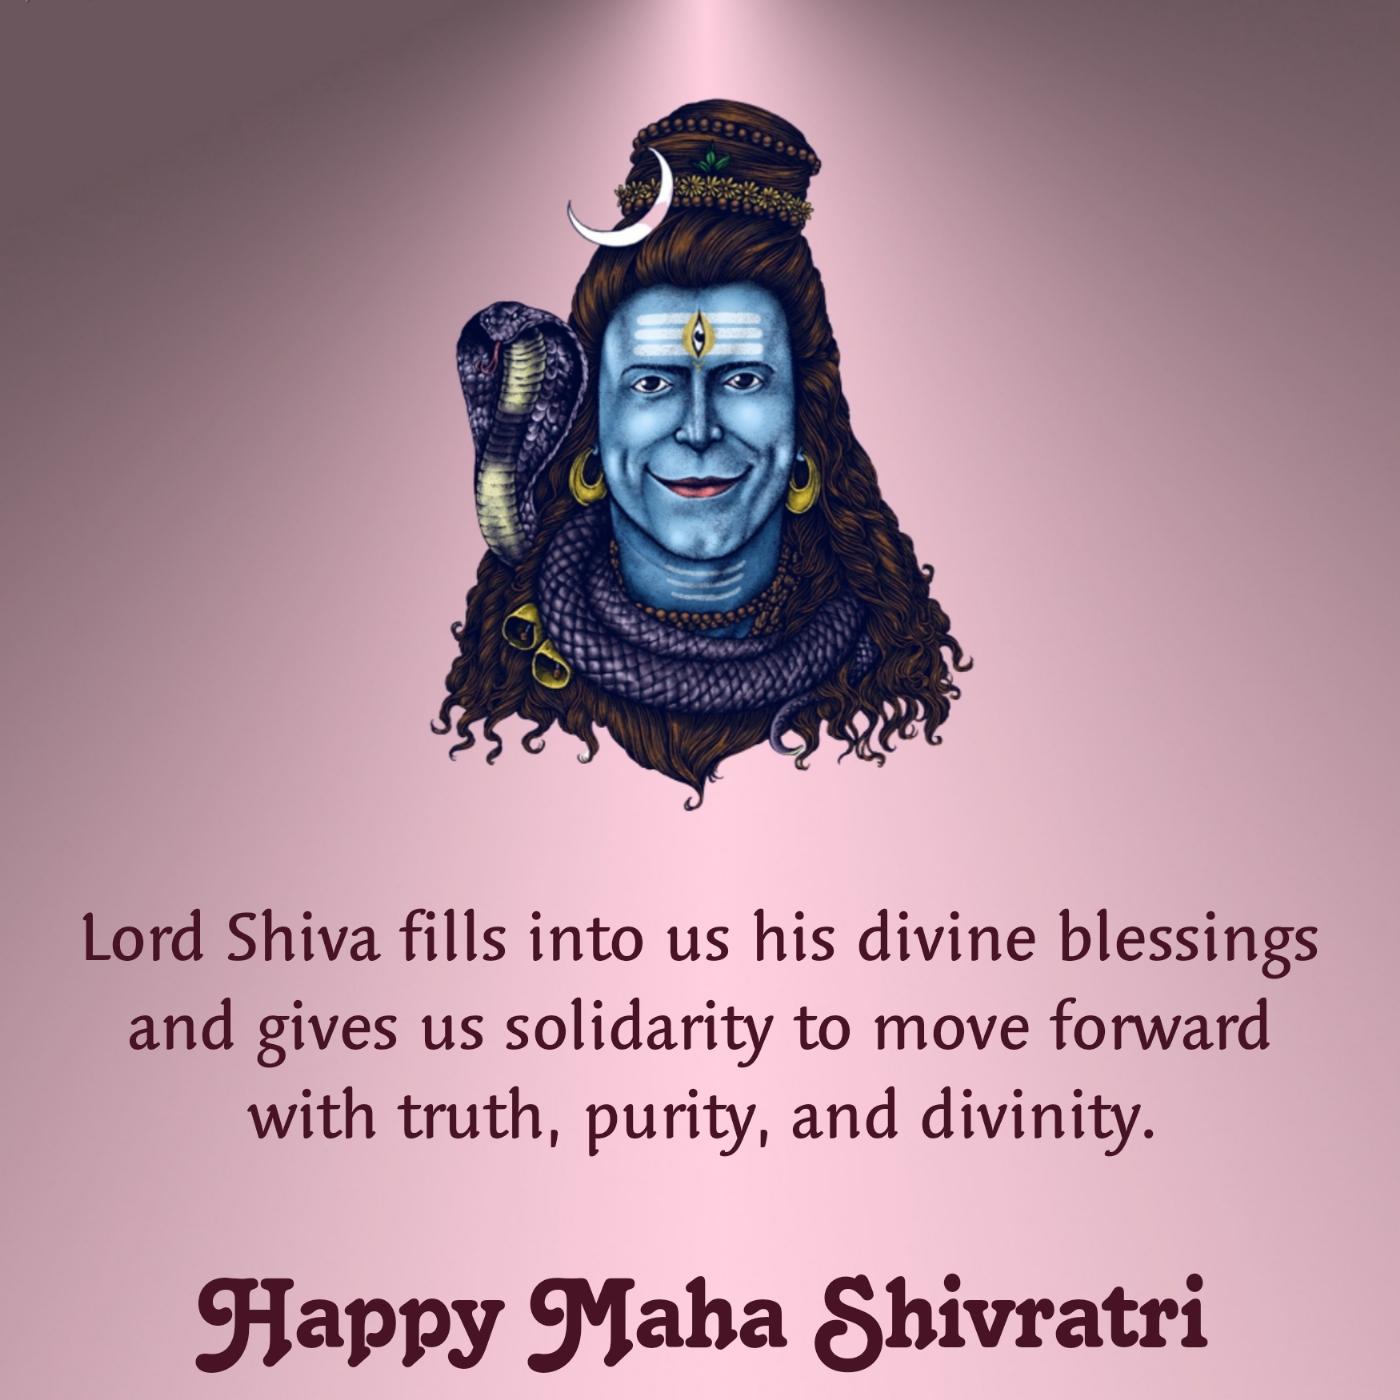 Lord Shiva fills into us his divine blessings and gives us solidarity